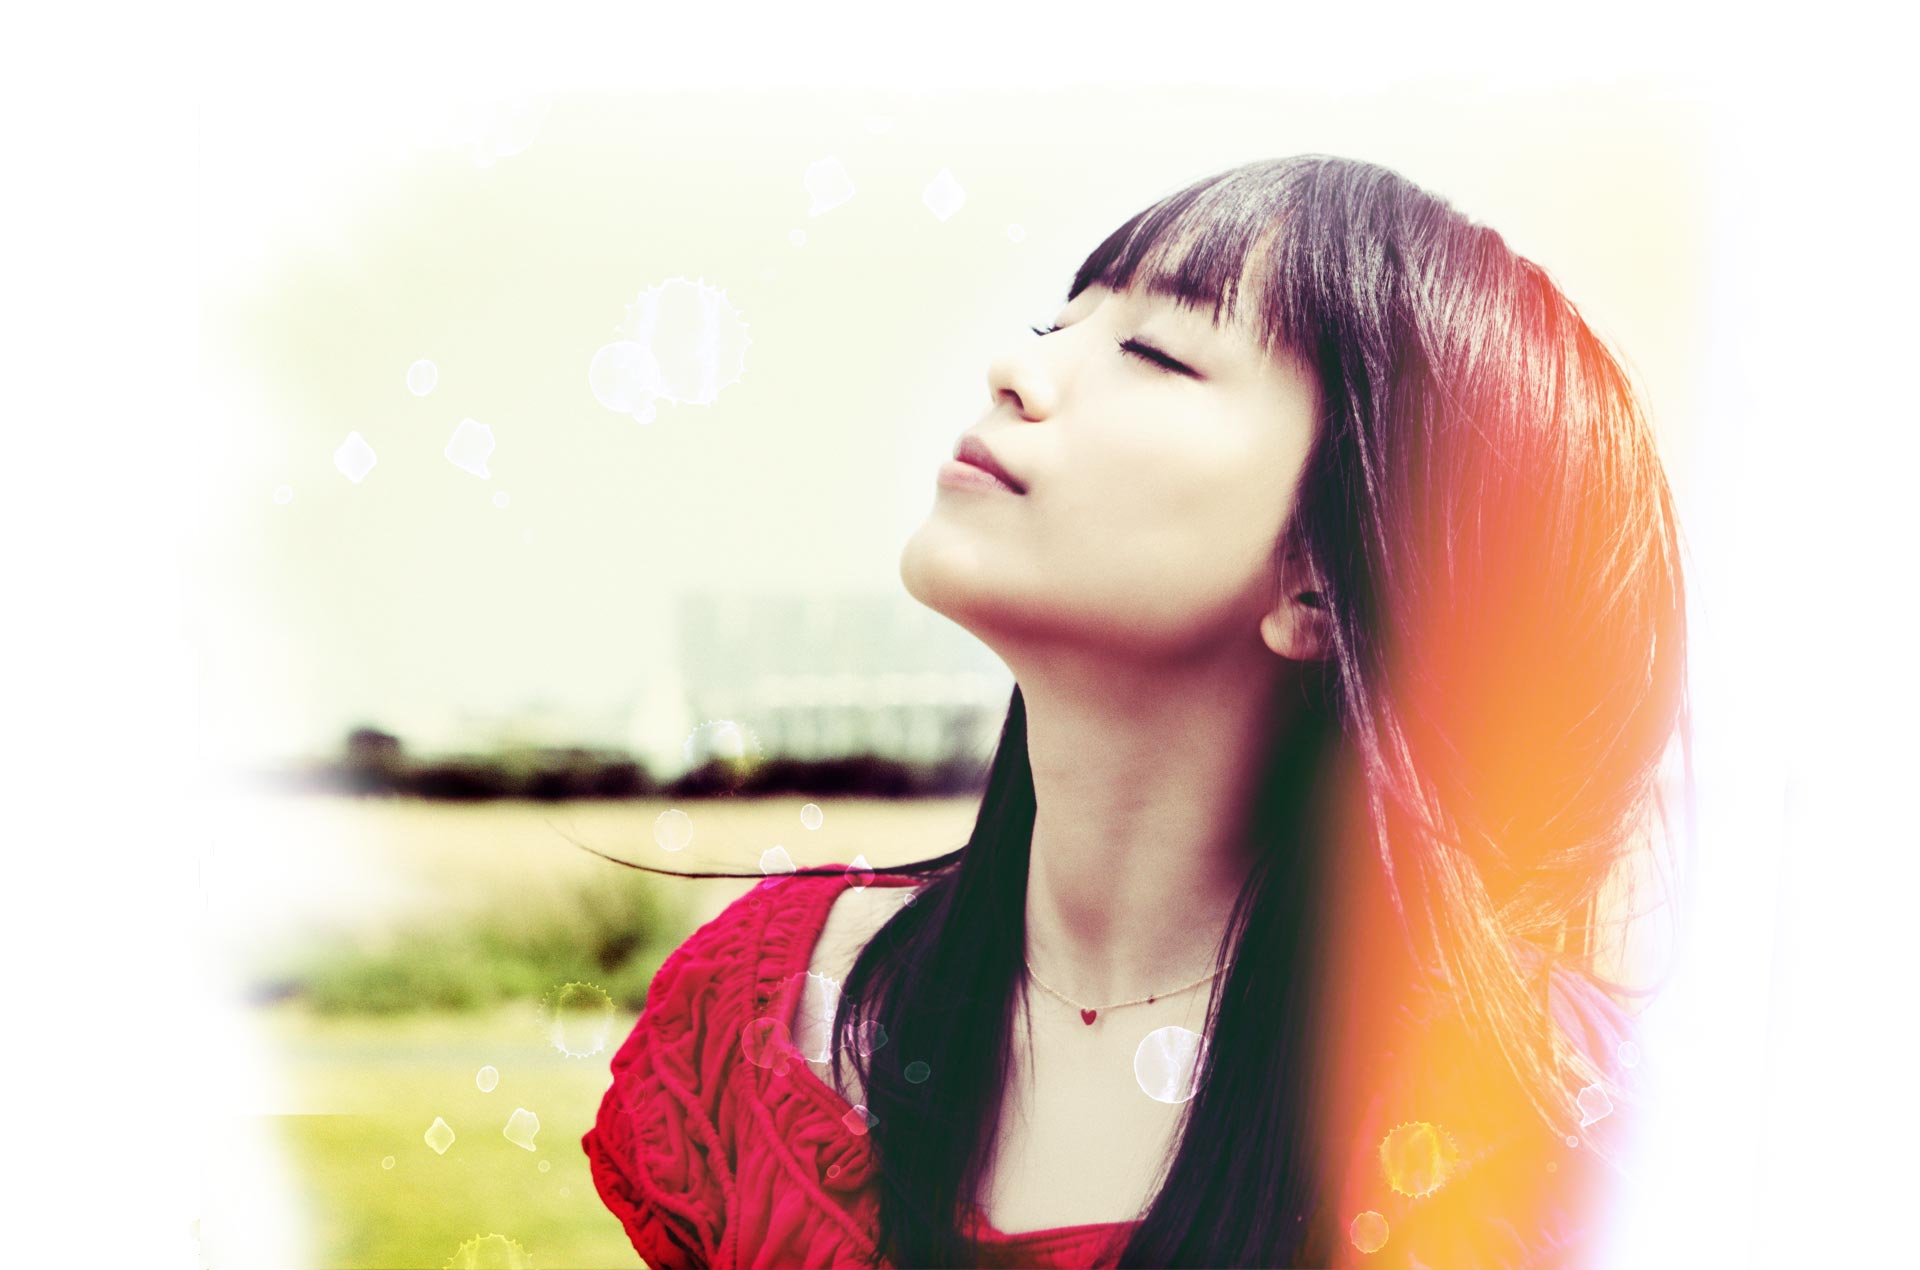 Miwa Wallpapers Music Hq Miwa Pictures 4k Wallpapers 19